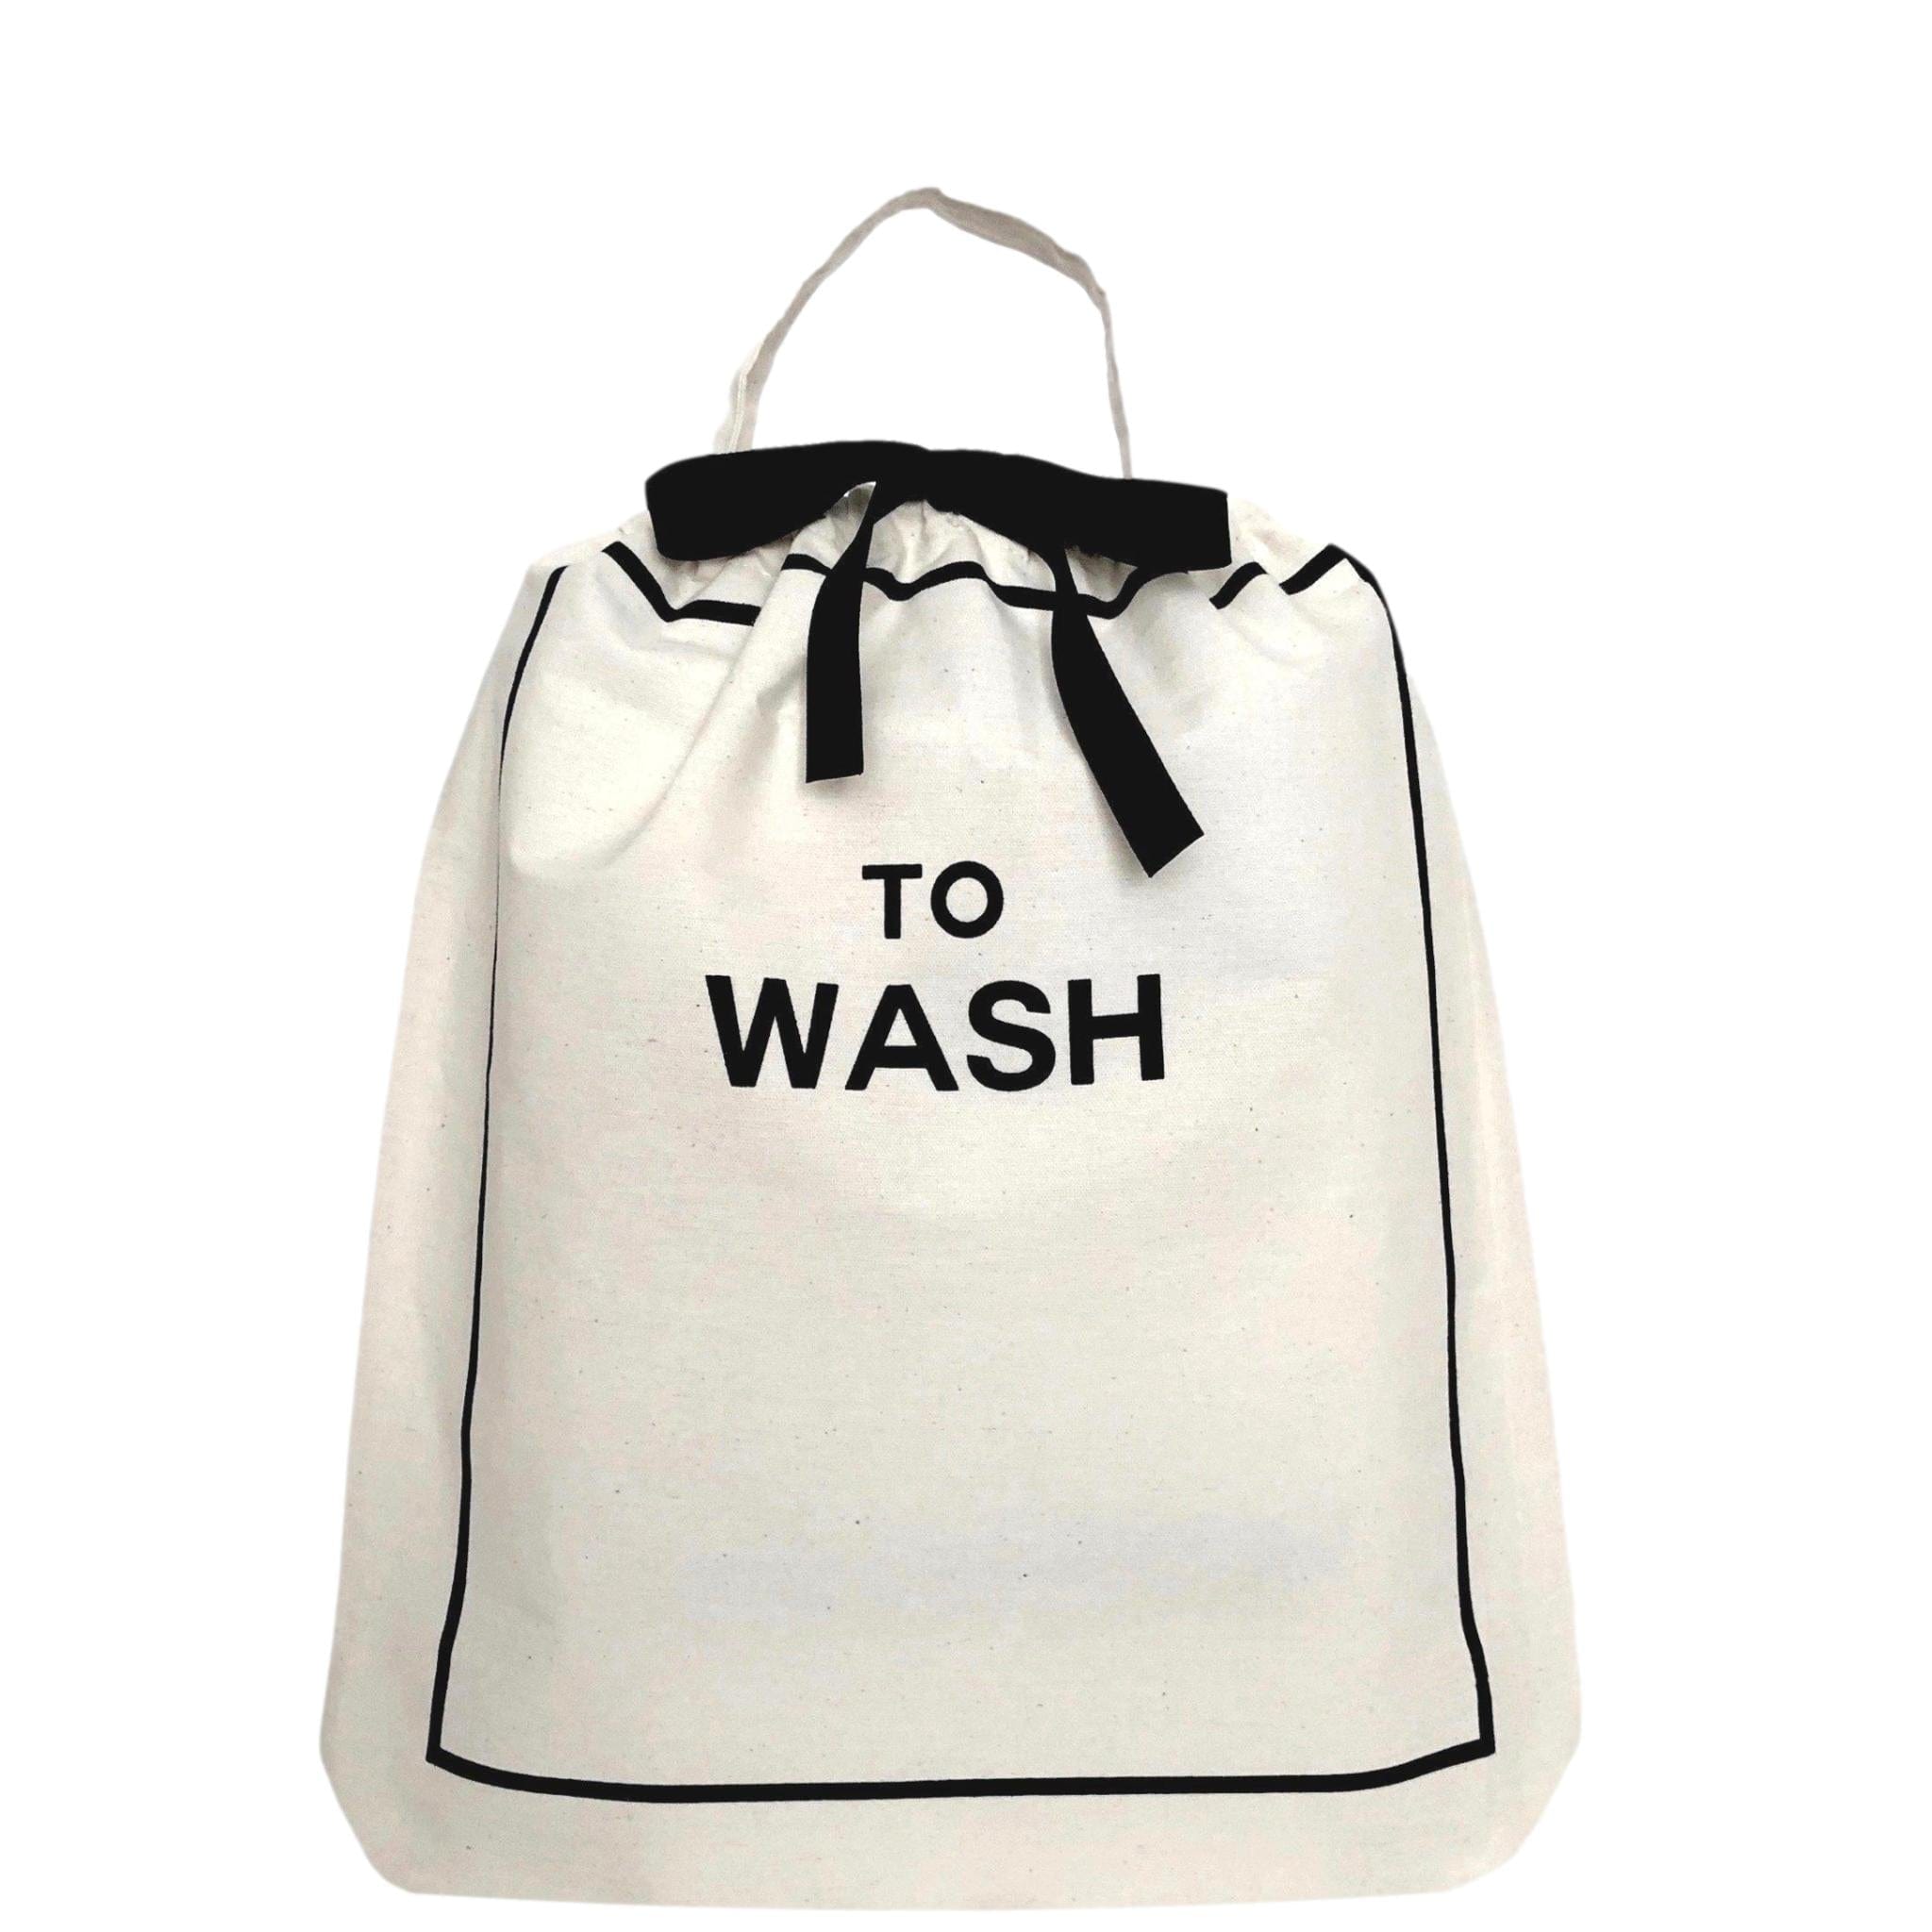 To Wash Laundry Bag